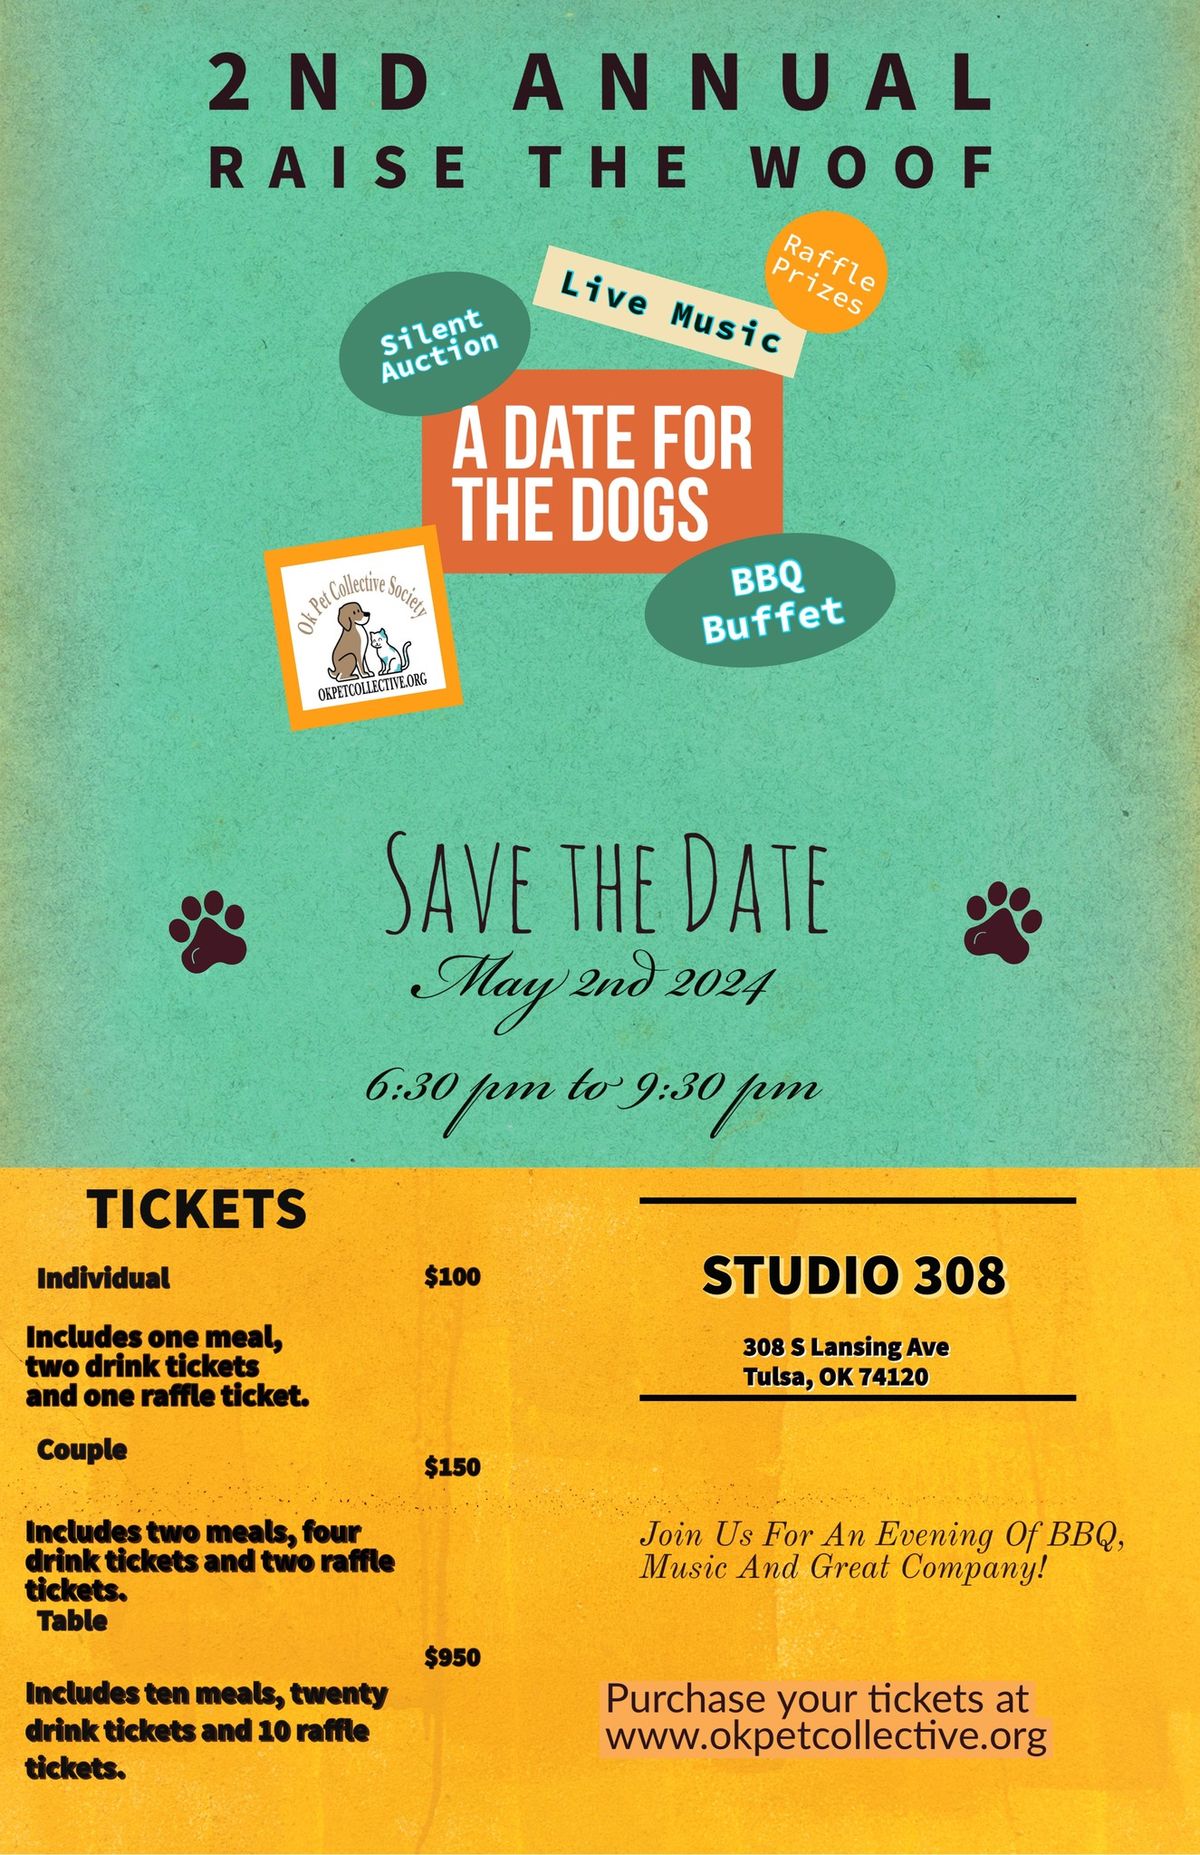 2nd annual Raise The Woof 